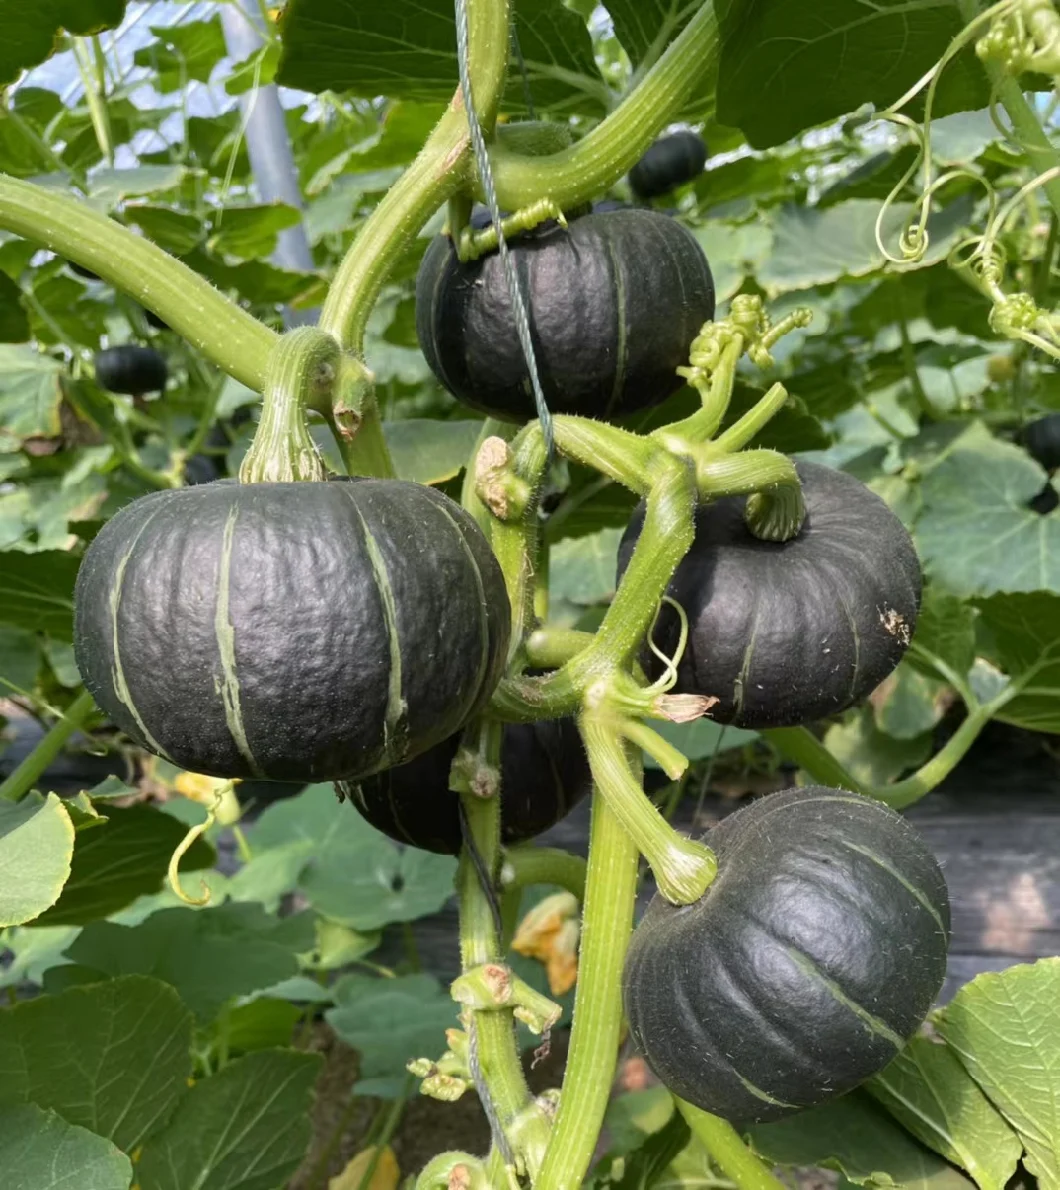 Early Maturing and High Yield Green Shell Pumpkin Seeds